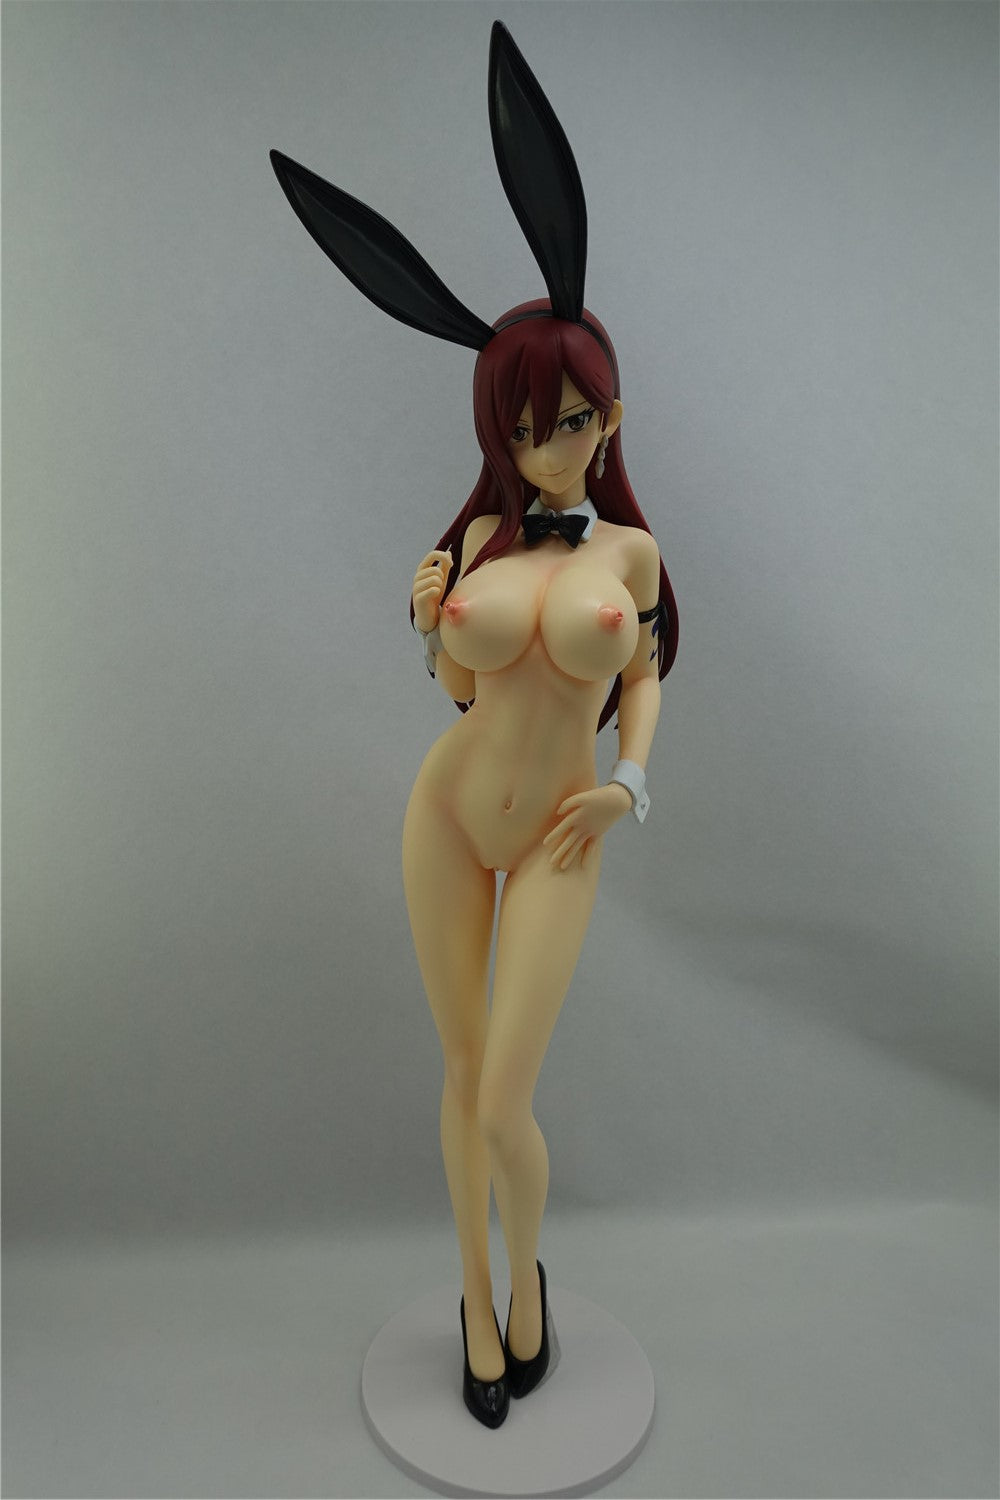 FAIRY TAIL Erza Scarlet: Bunny Ver. 1/4 naked anime figure